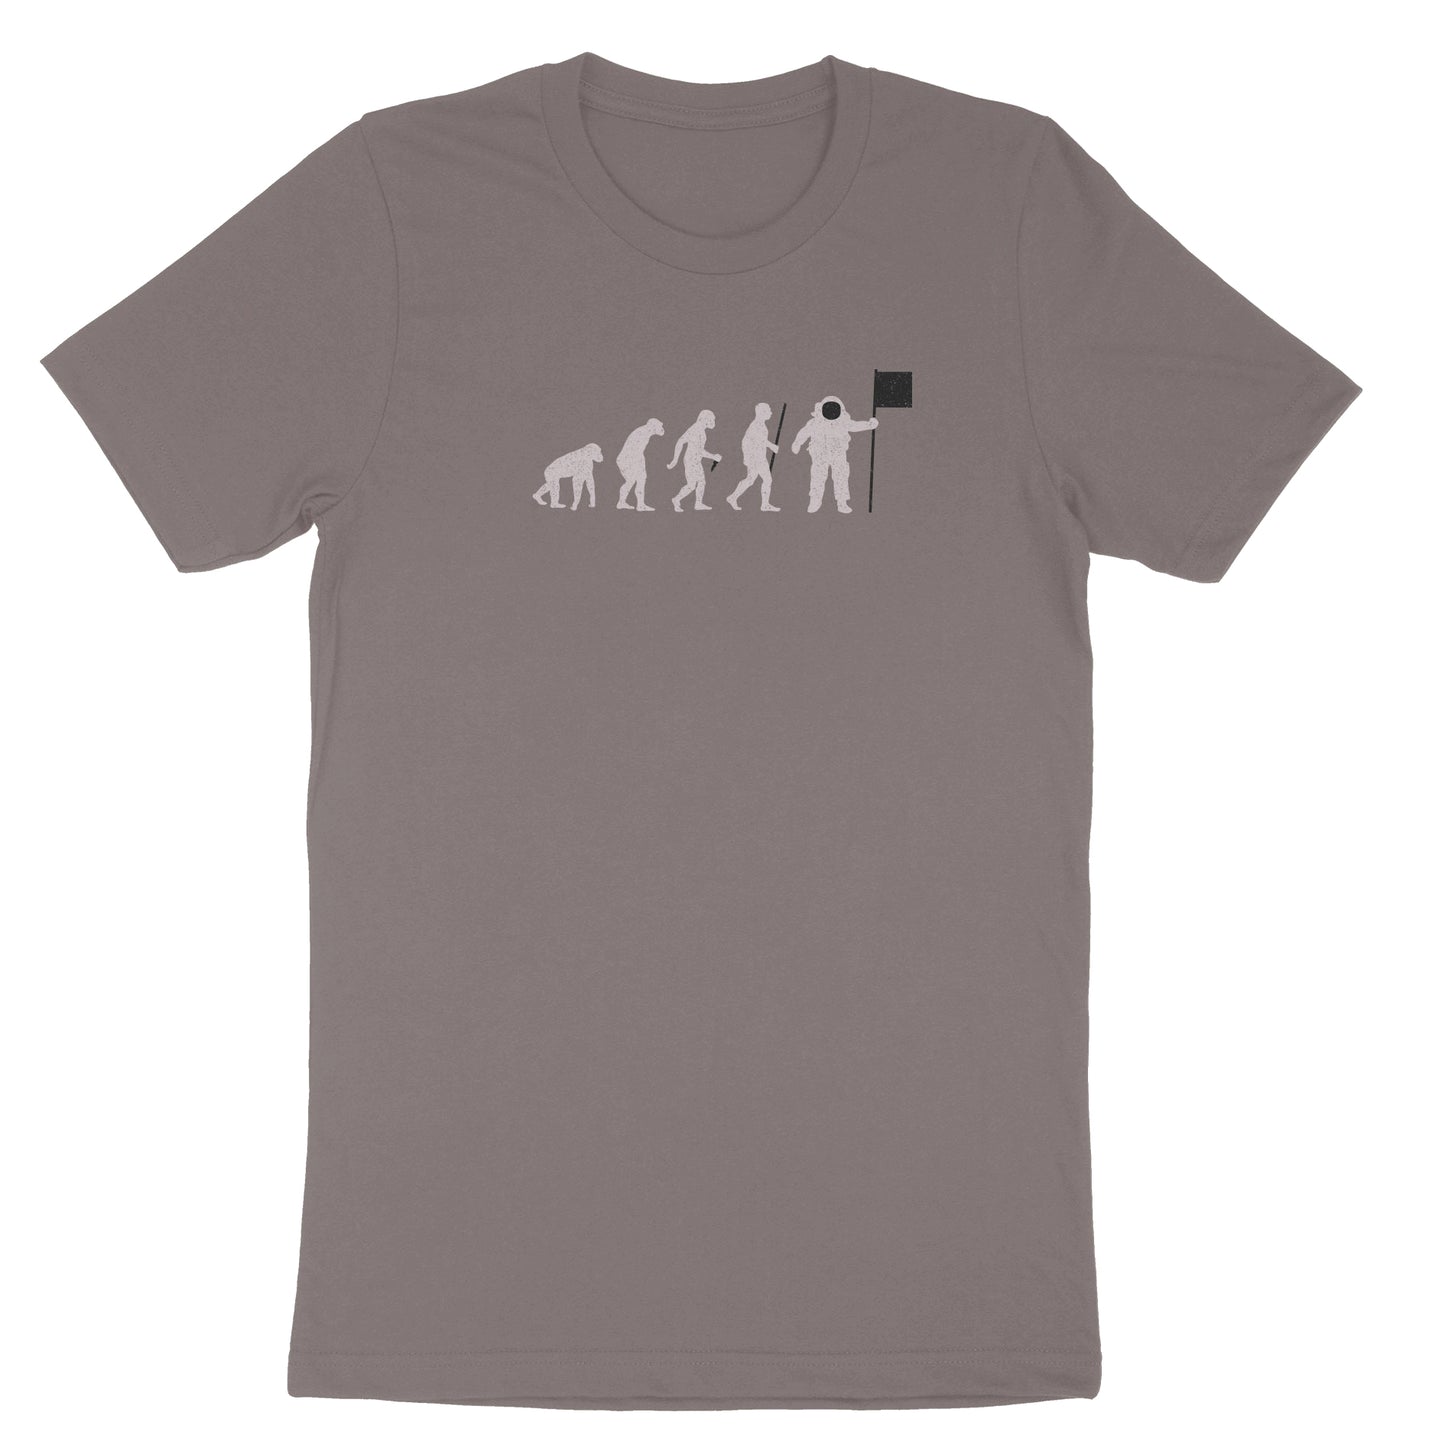 Image of evolution progression from ape to spaceman on grey t-shirt